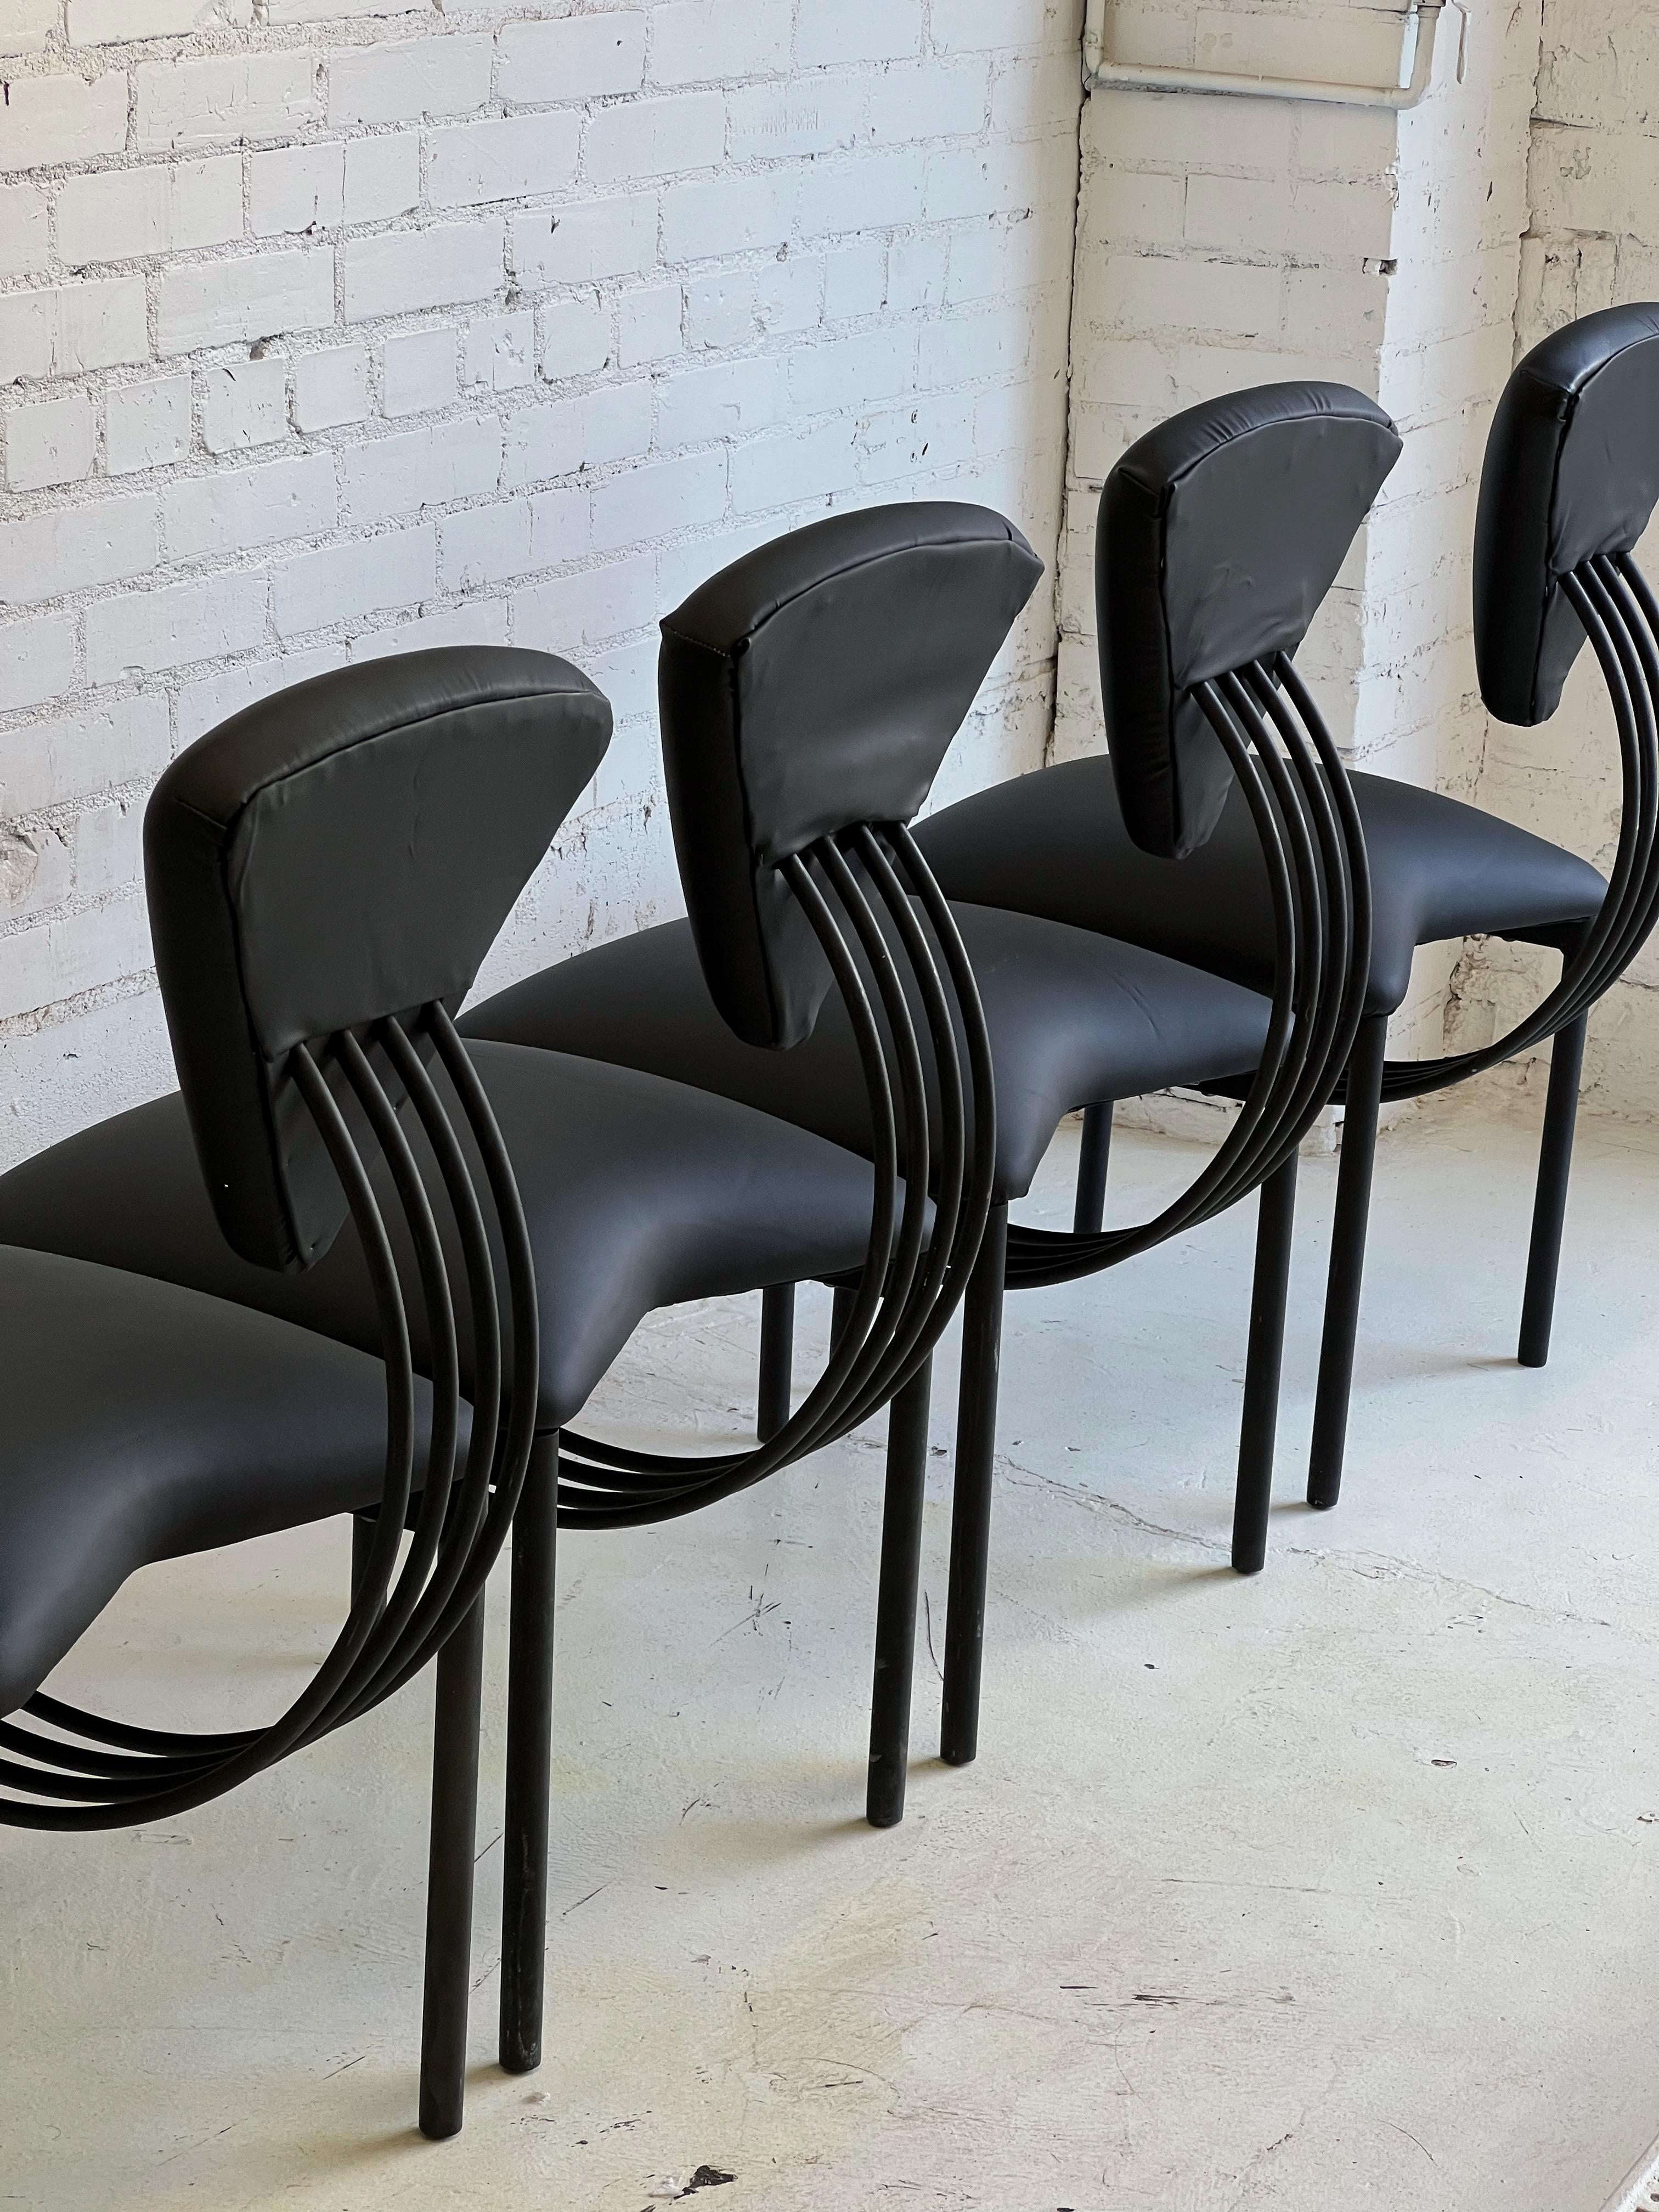 Monochrome Memphis Style Chairs in the Style of Ettore Sottsass In Good Condition For Sale In Glendale, AZ